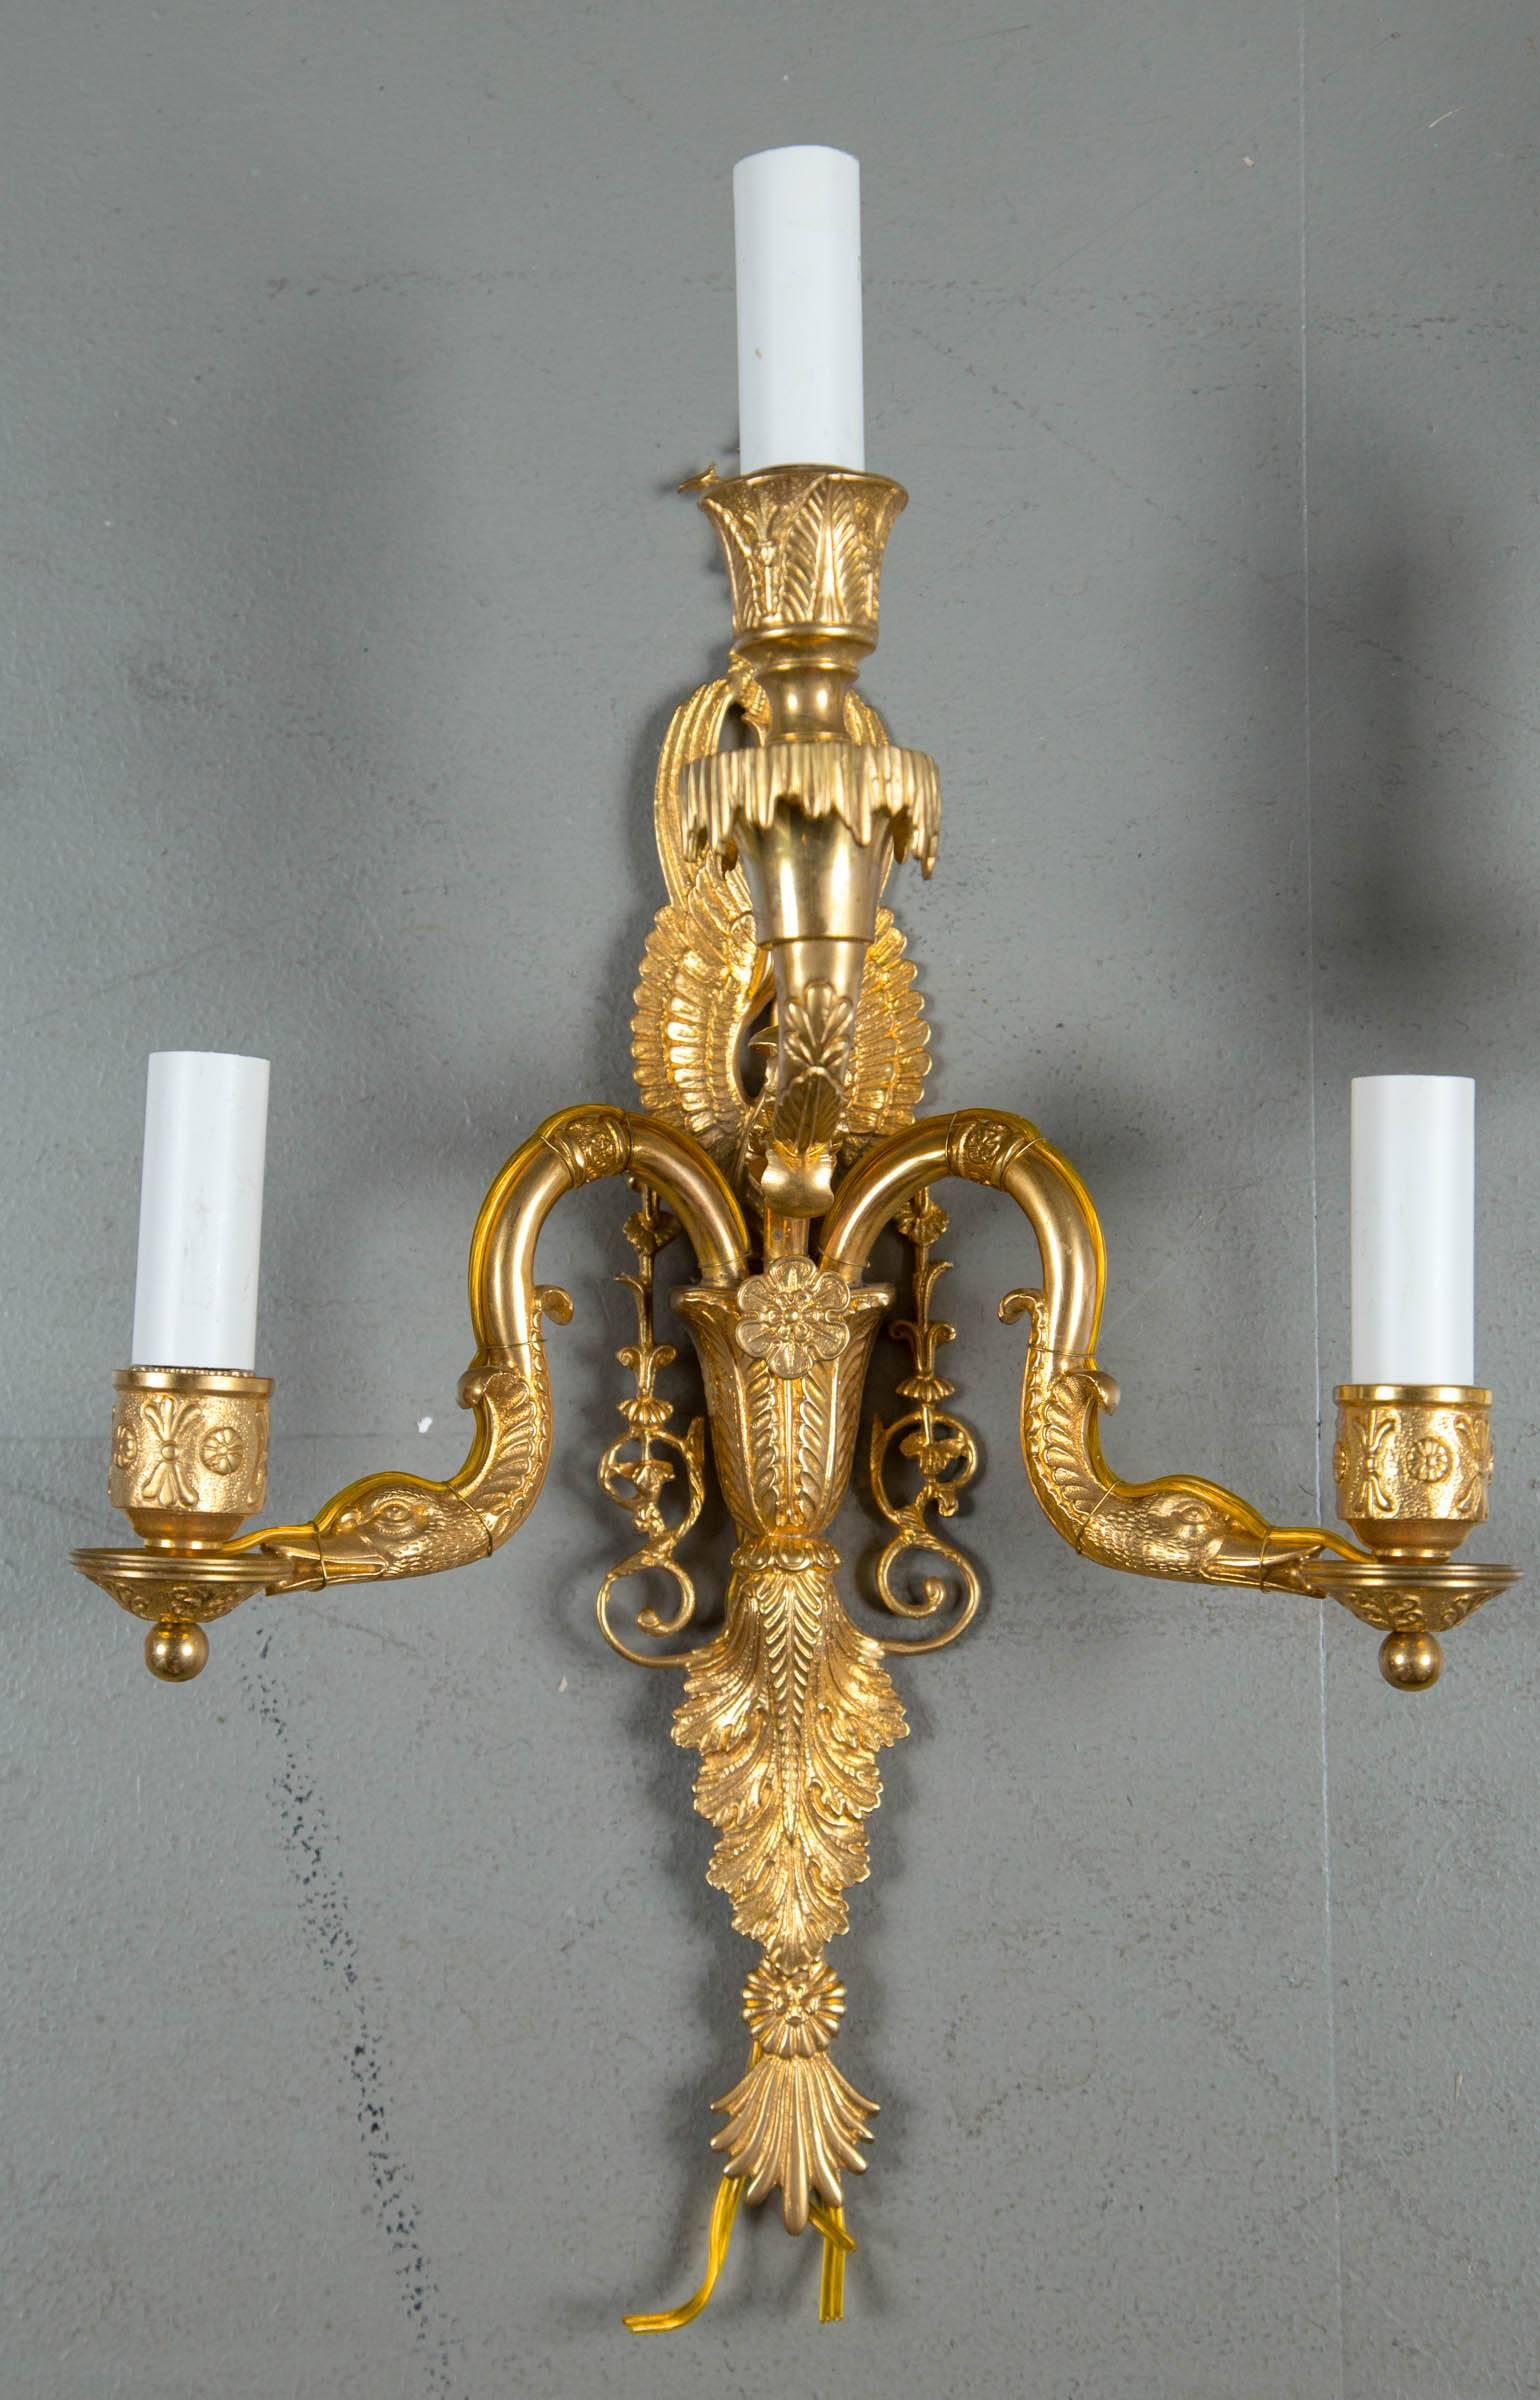 A pair of 1930 French Empire style sconces with three lights.